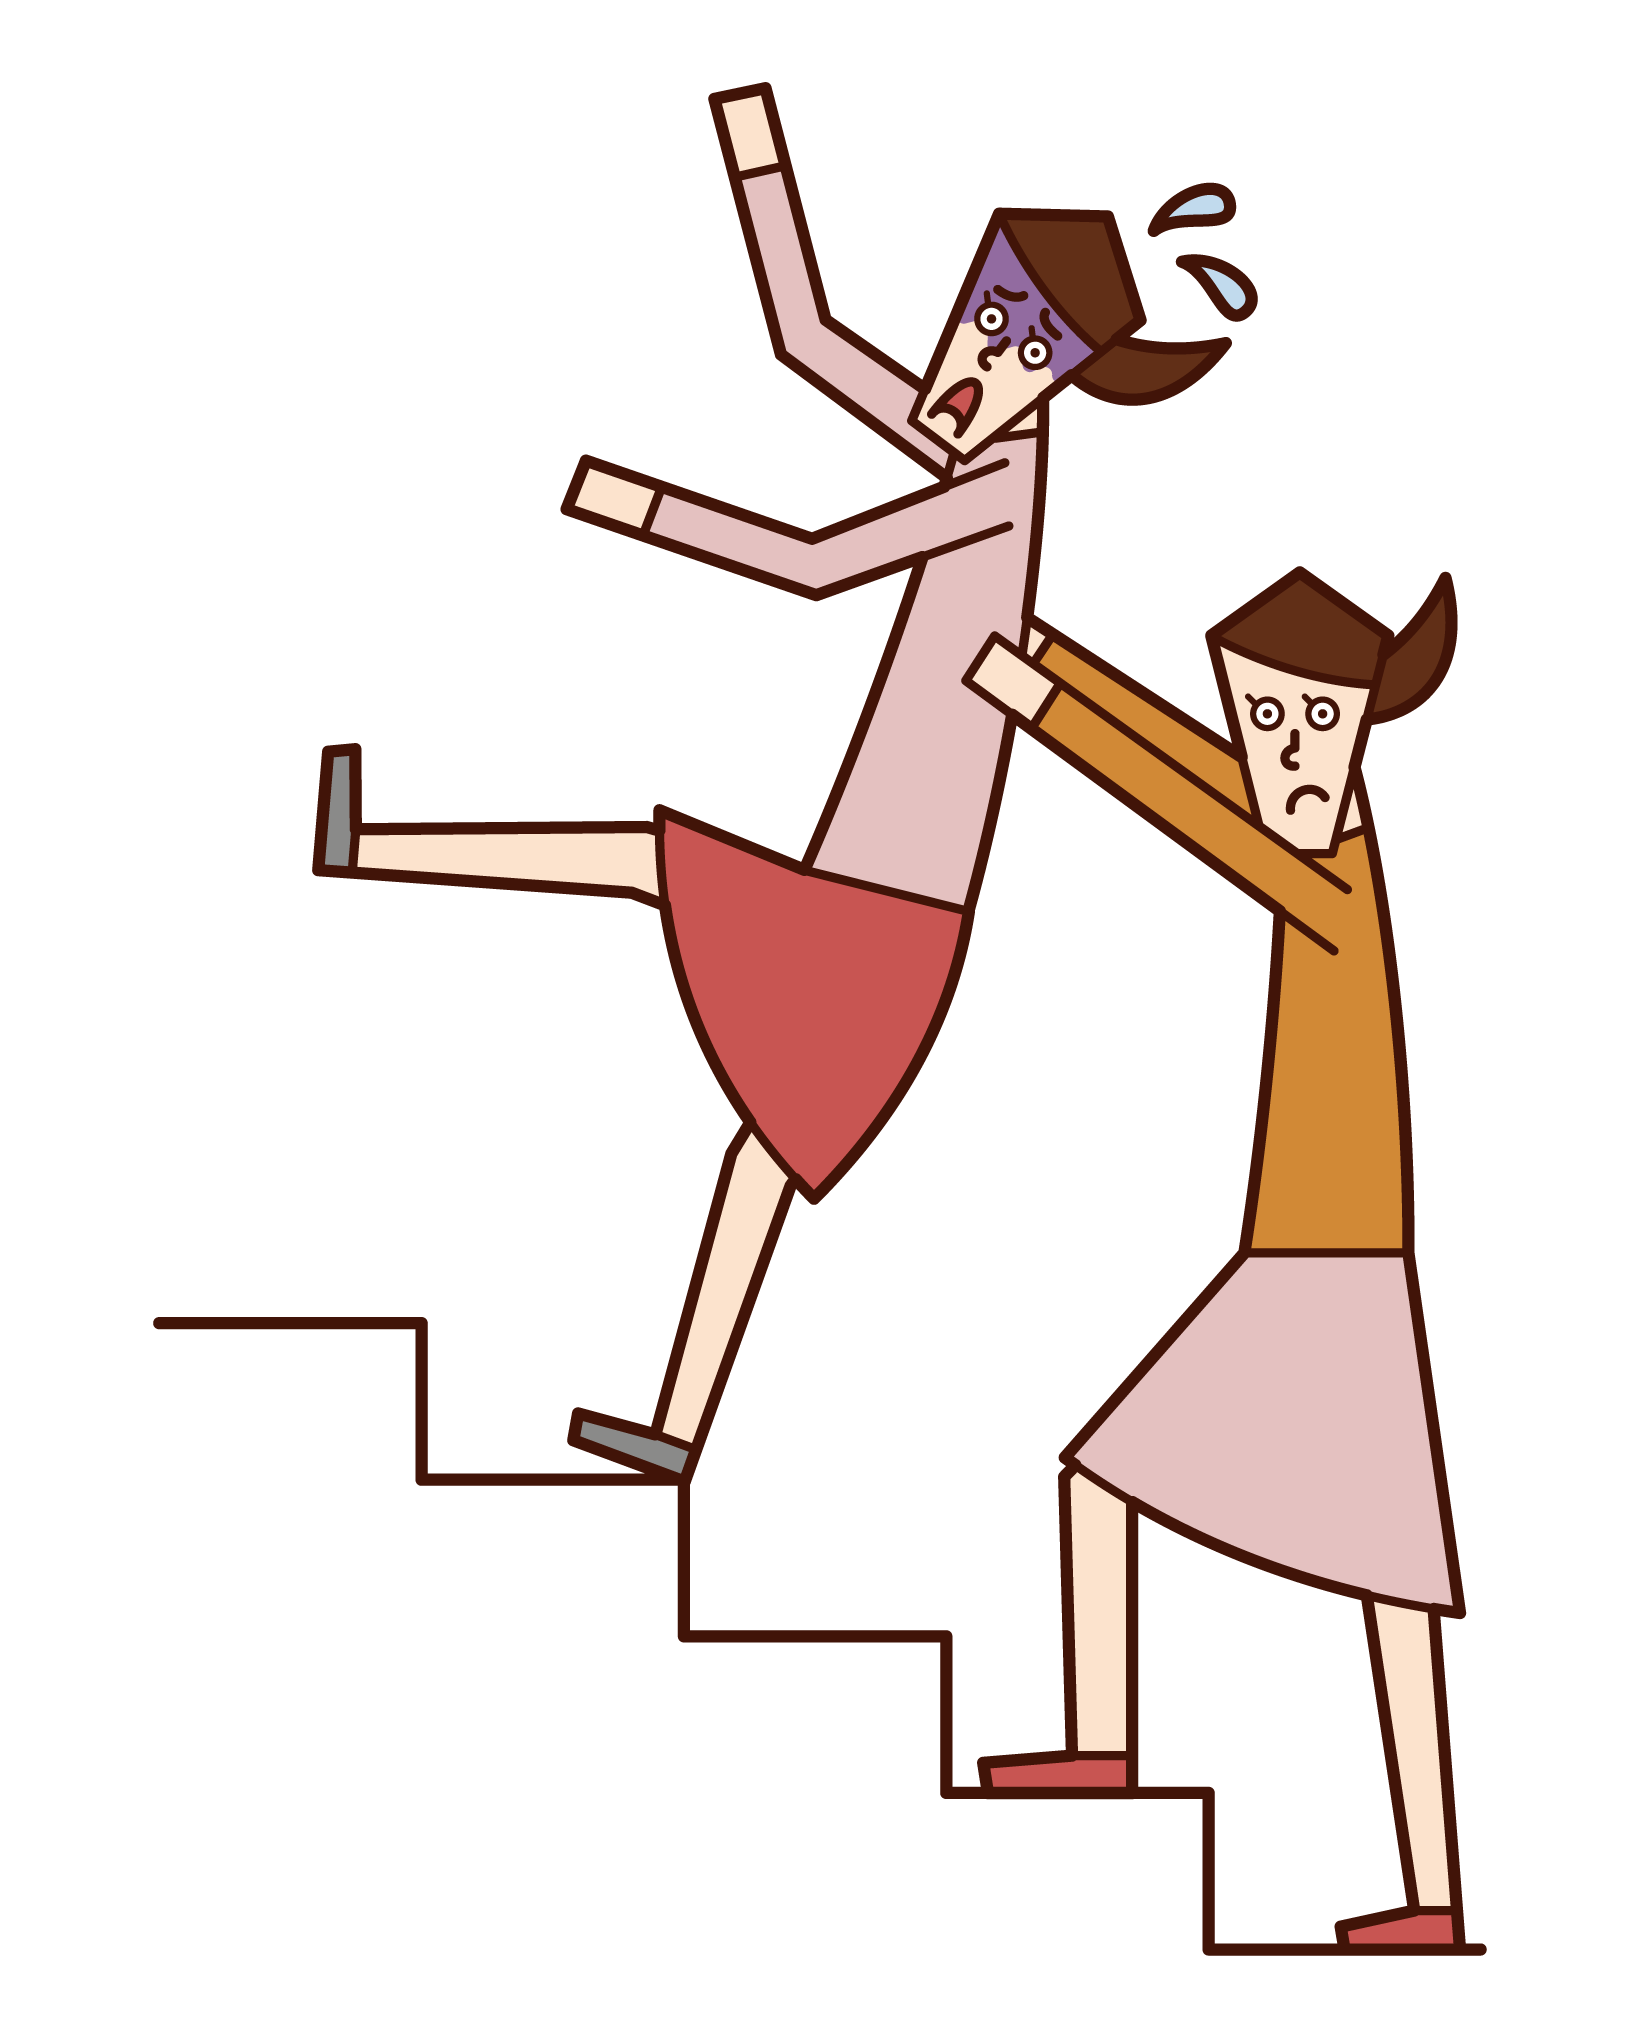 Illustration of a person (woman) who helps a person